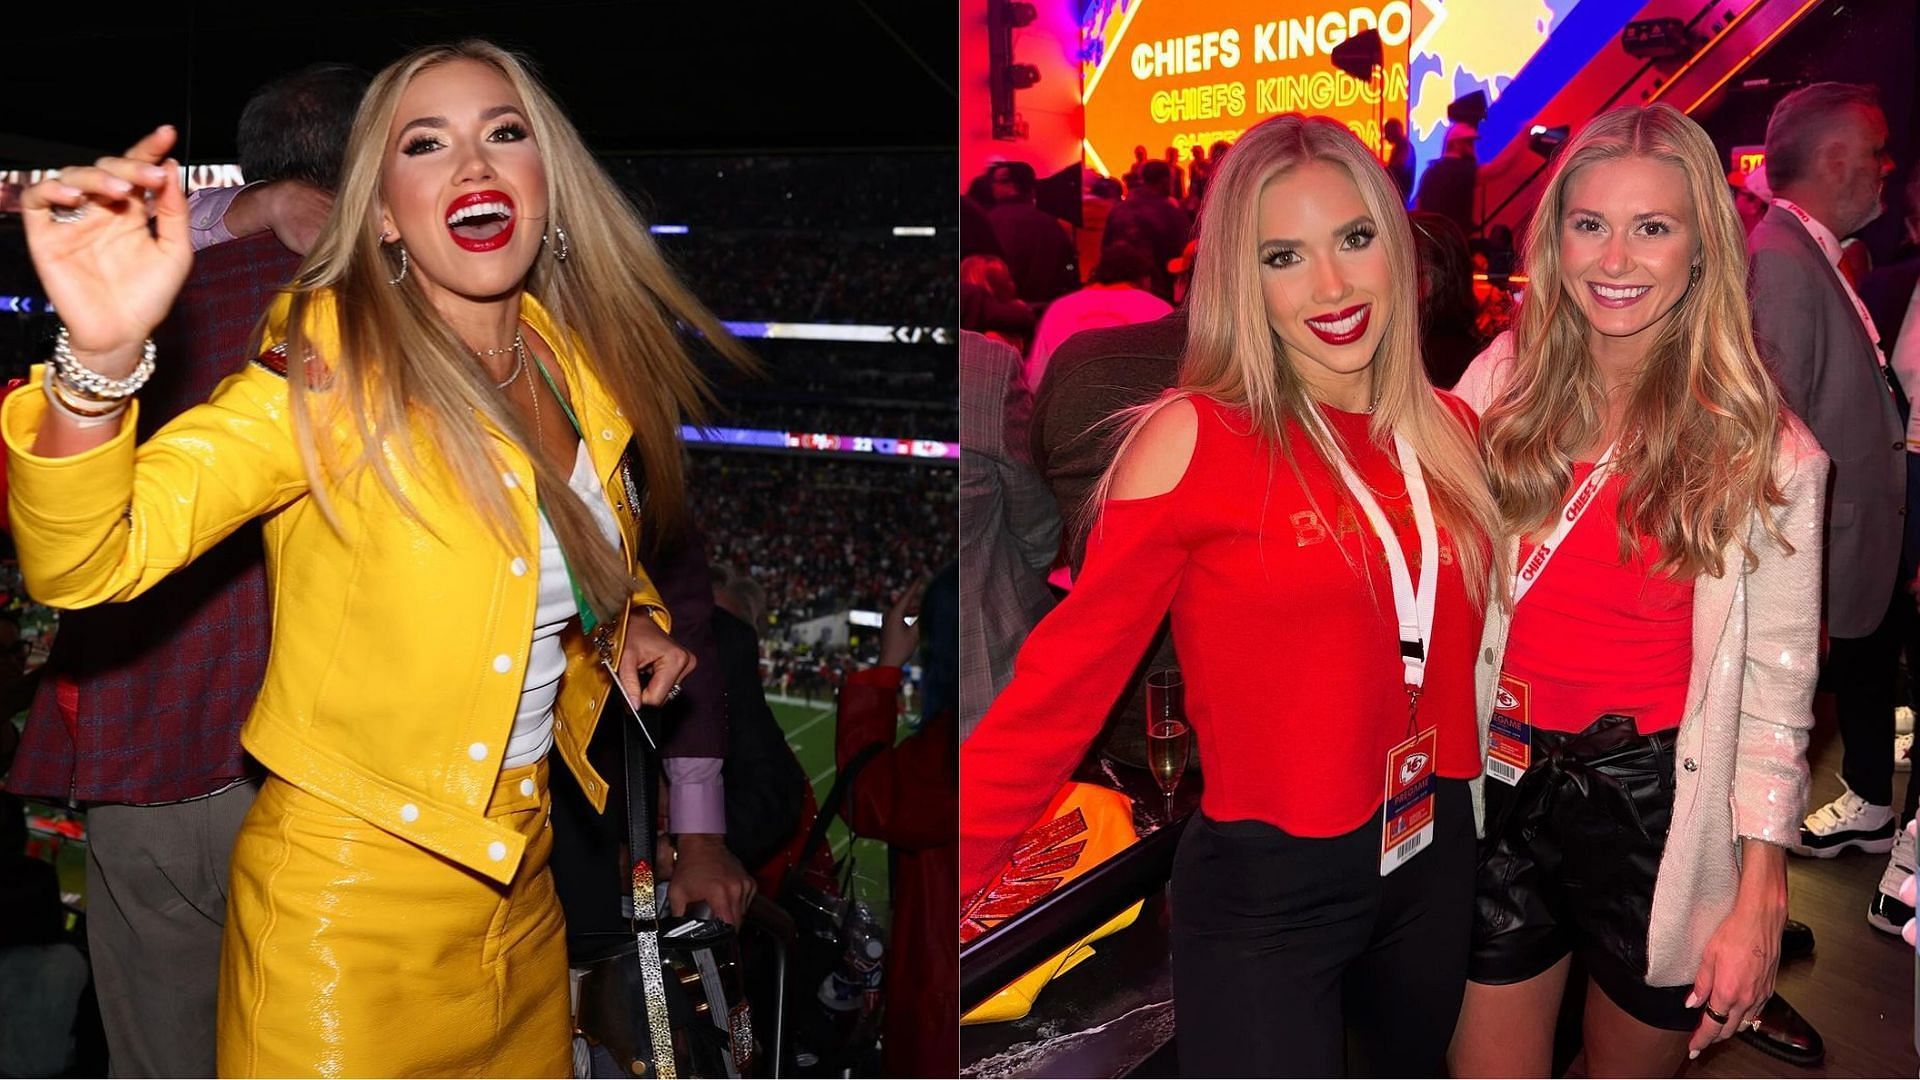 Gracie Hunt shared photos and videos from the Kansas City Chiefs&rsquo; afterparty for their Super Bowl 58 victory.